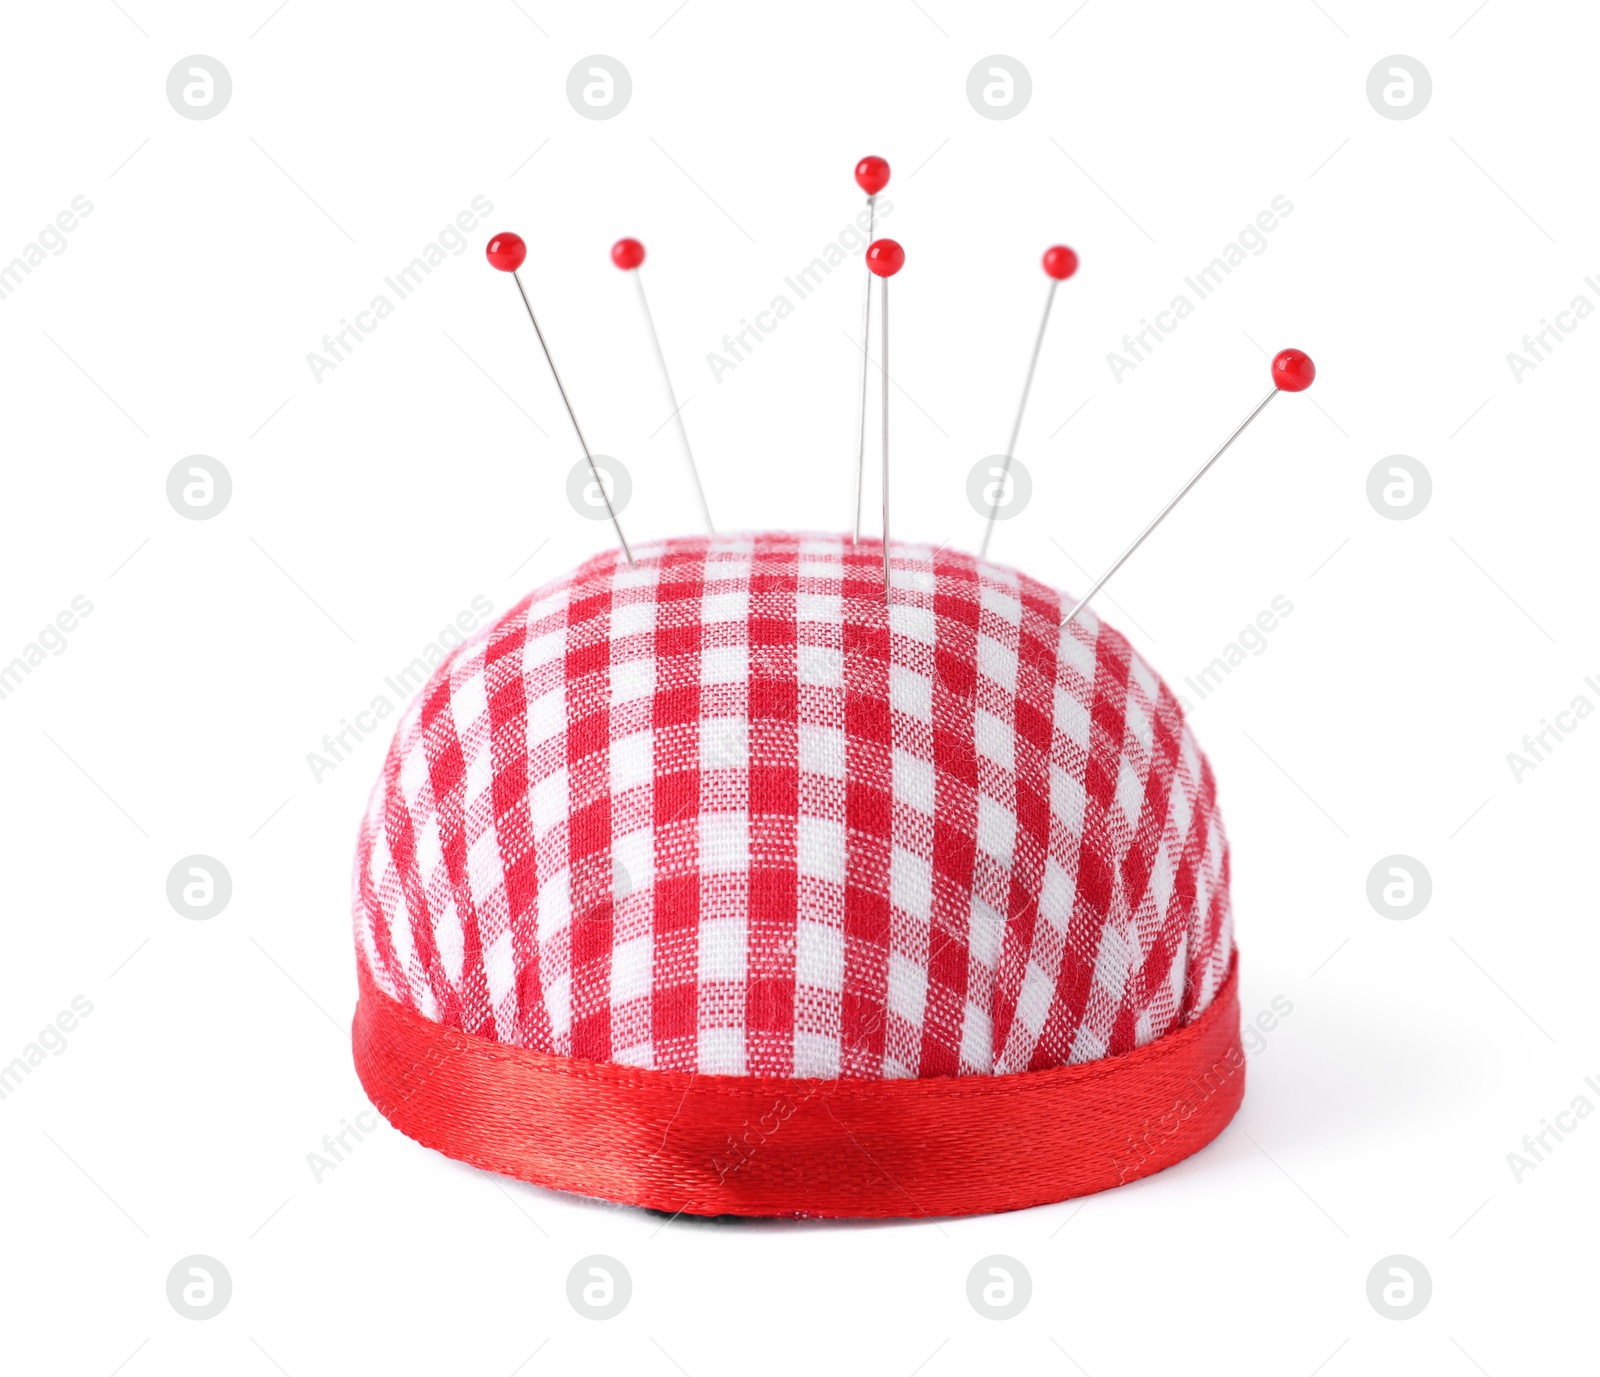 Photo of Red pincushion with sewing pins isolated on white